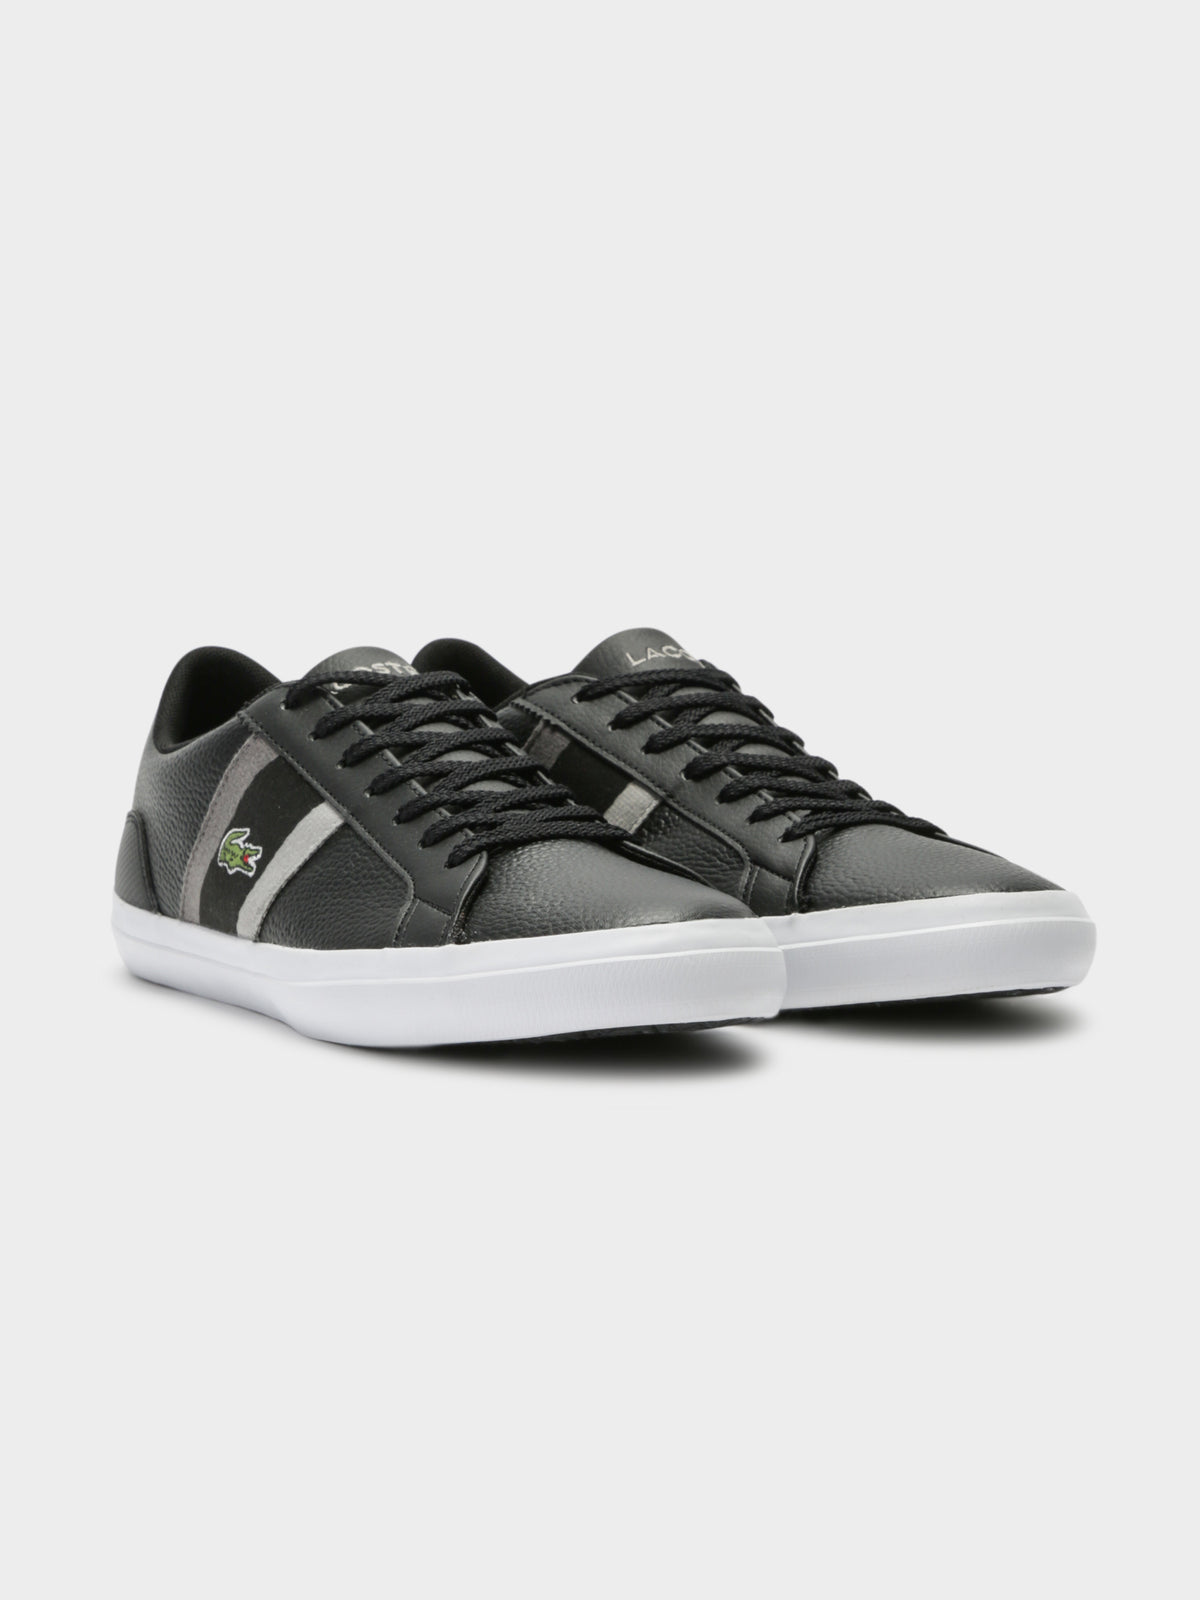 Lenord 119 3 CMA Sneakers in Black and Grey